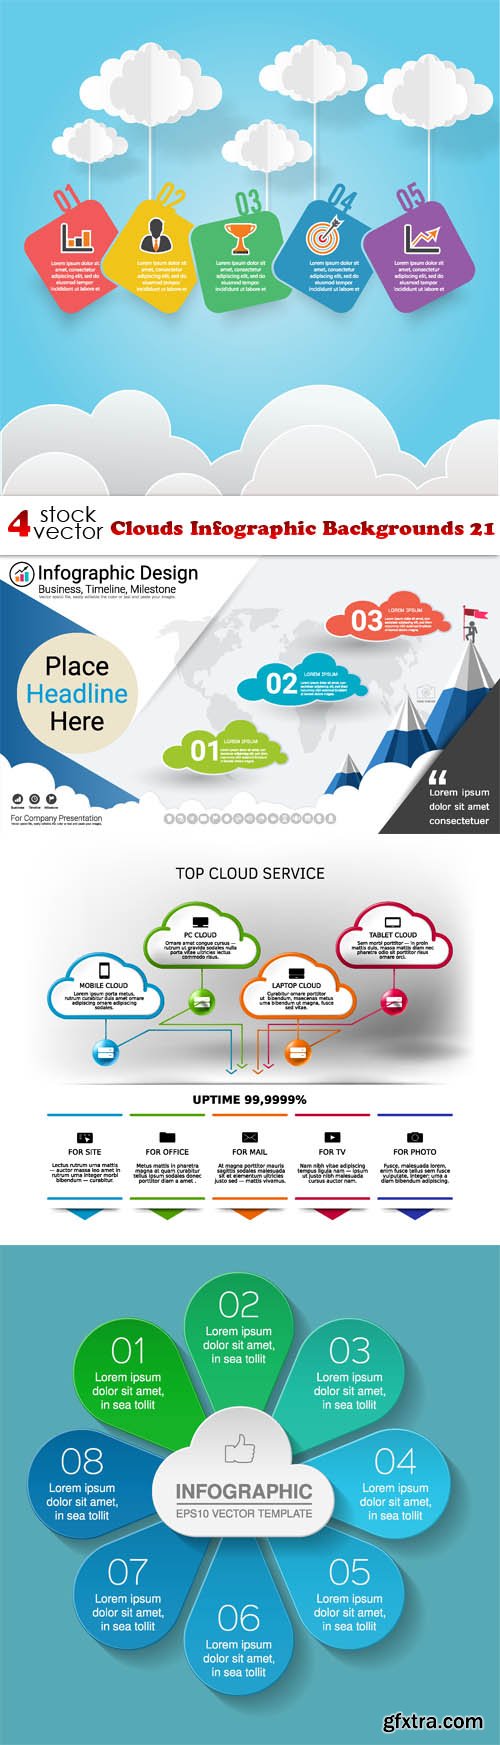 Vectors - Clouds Infographic Backgrounds 21